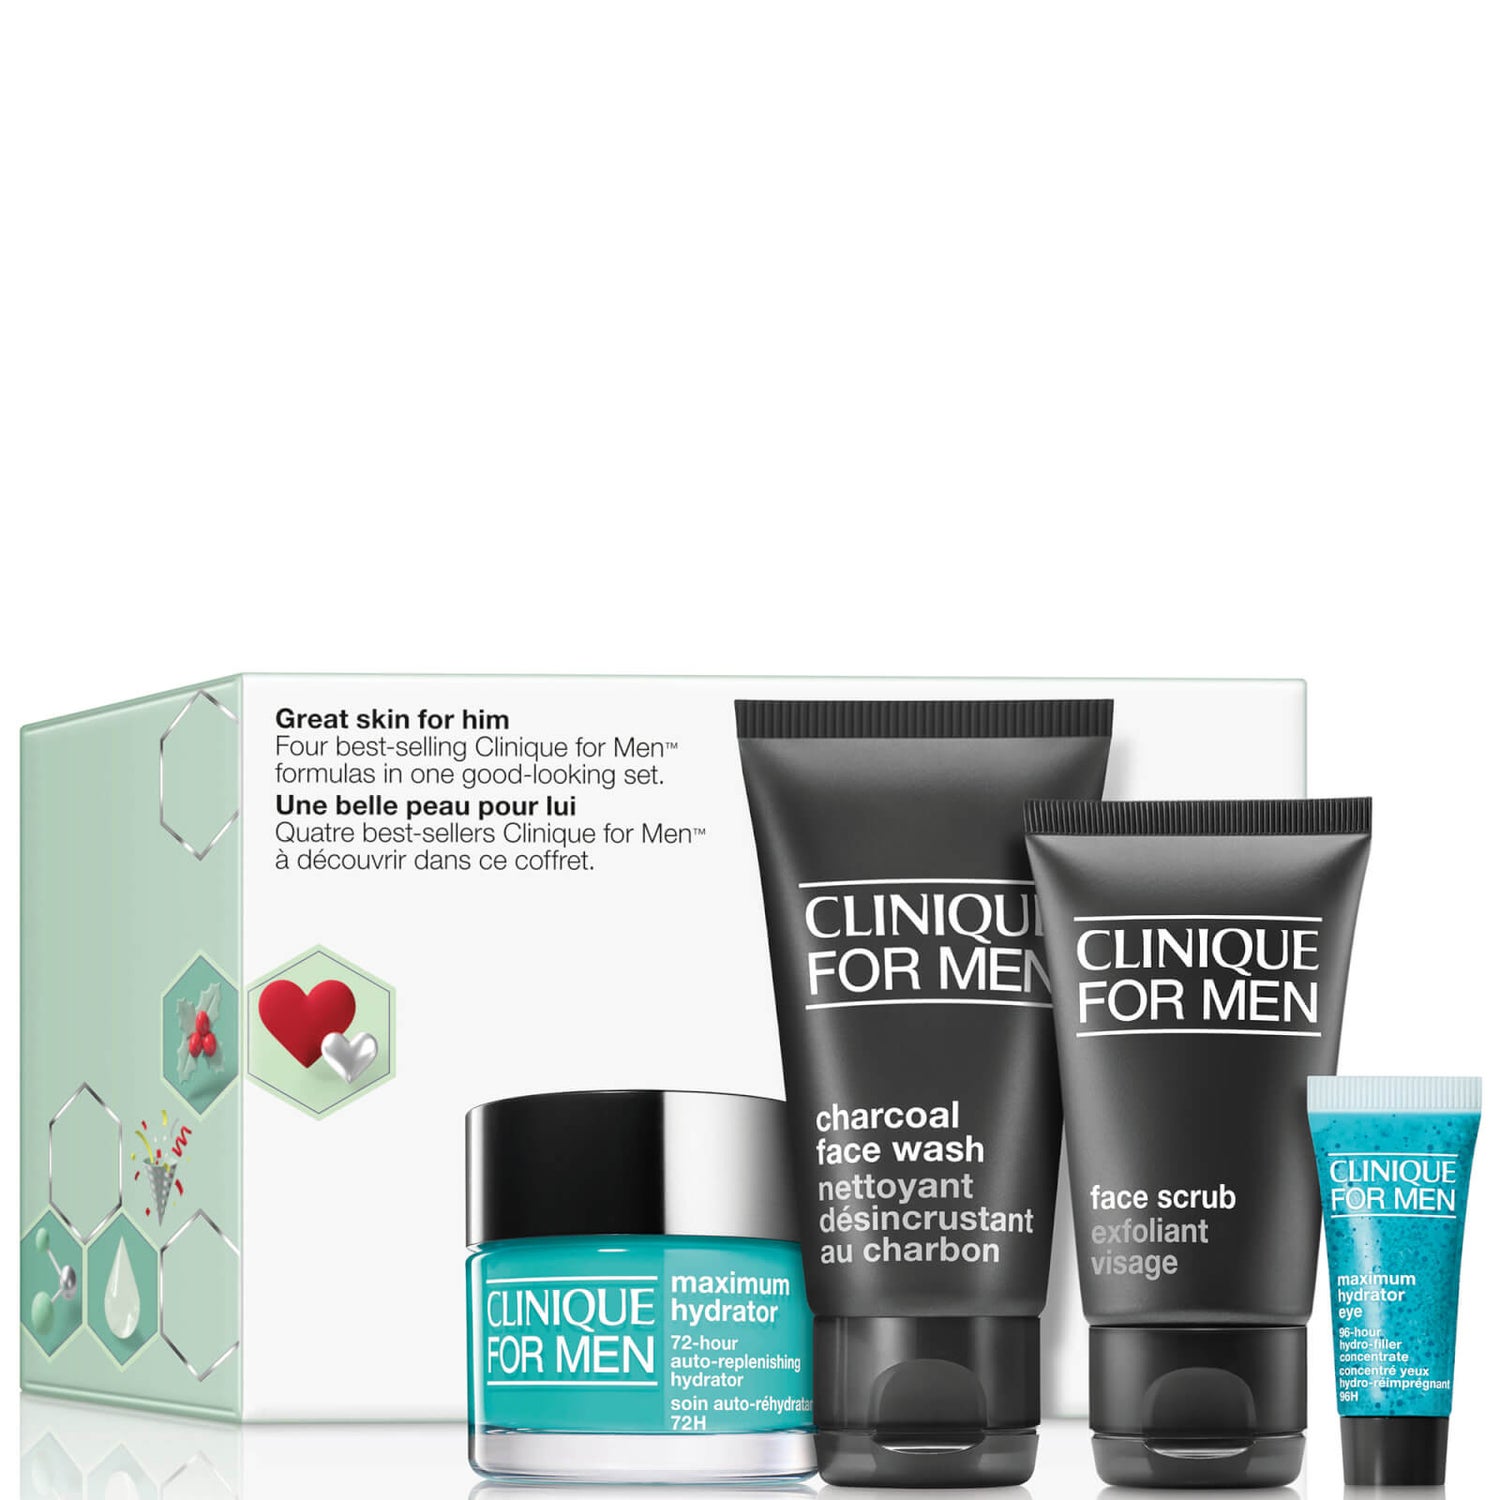 Clinique Great Skin for Him Men's Skincare Gift Set (Worth £59.81)